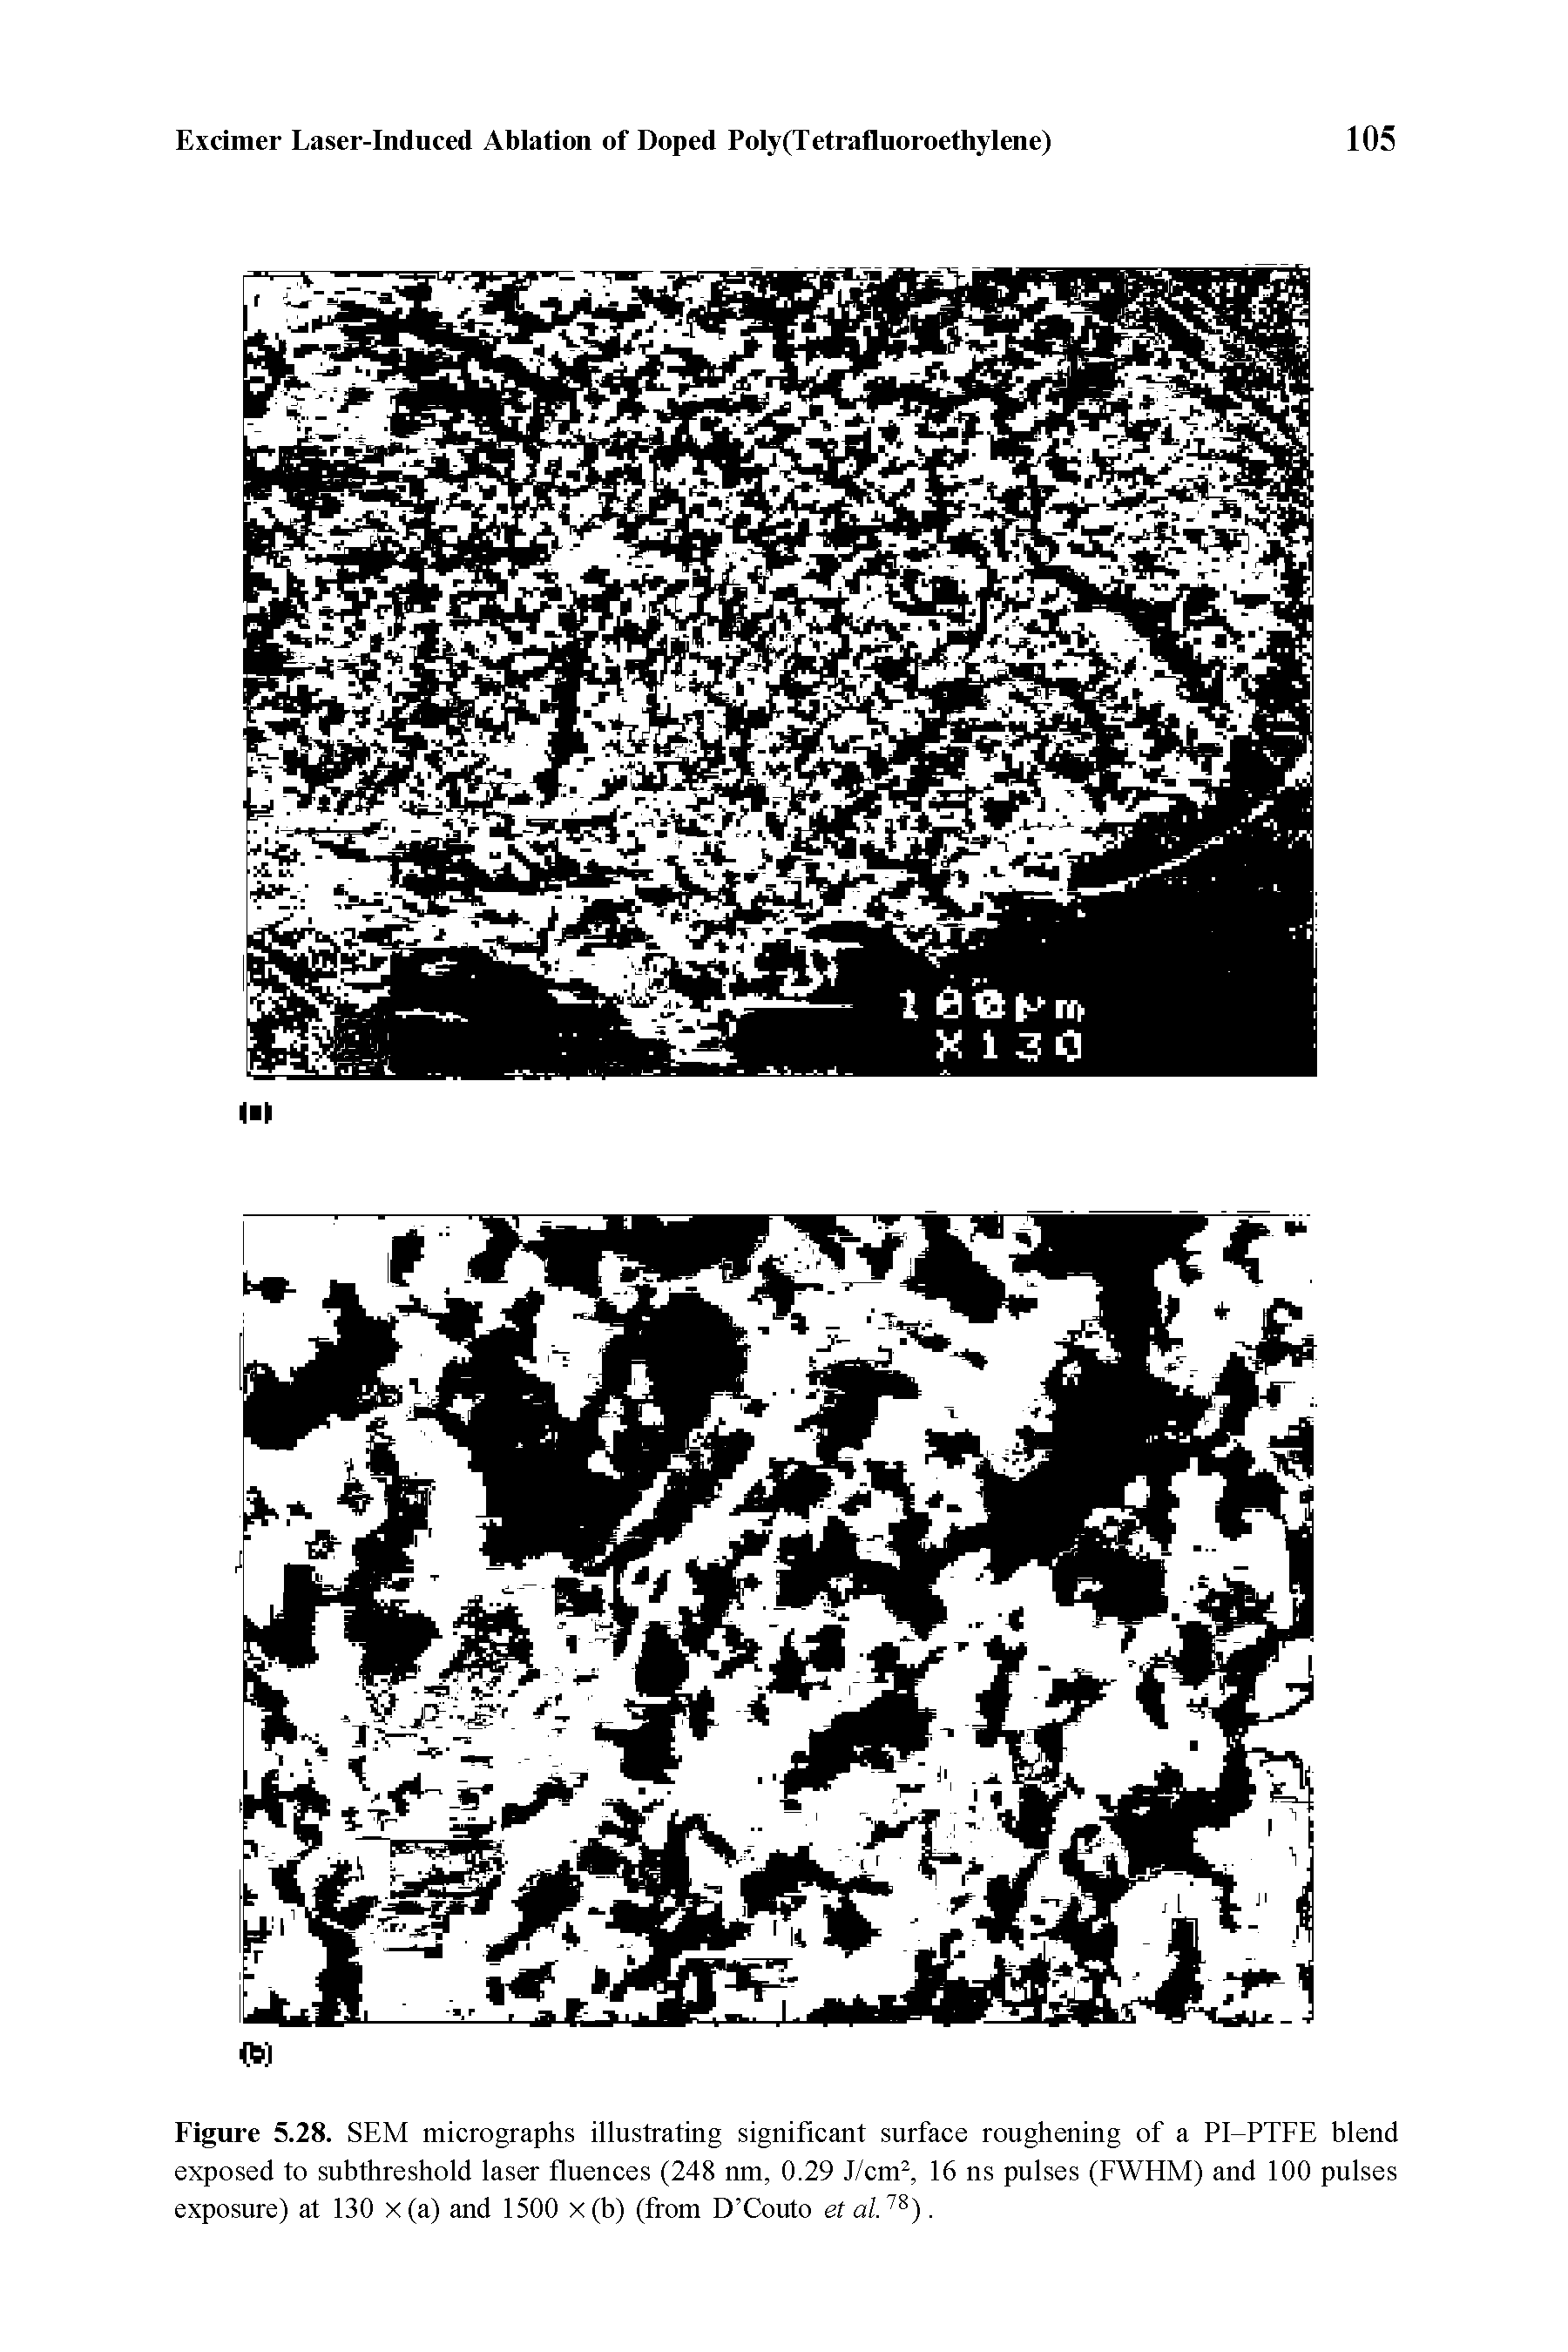 Figure 5.28. SEM micrographs illustrating significant surface roughening of a PI-PTFE blend exposed to subthreshold laser fluences (248 nm, 0.29 J/cm2, 16 ns pulses (FWE1M) and 100 pulses exposure) at 130 x(a) and 1500 x(b) (from D Couto et al.ls).